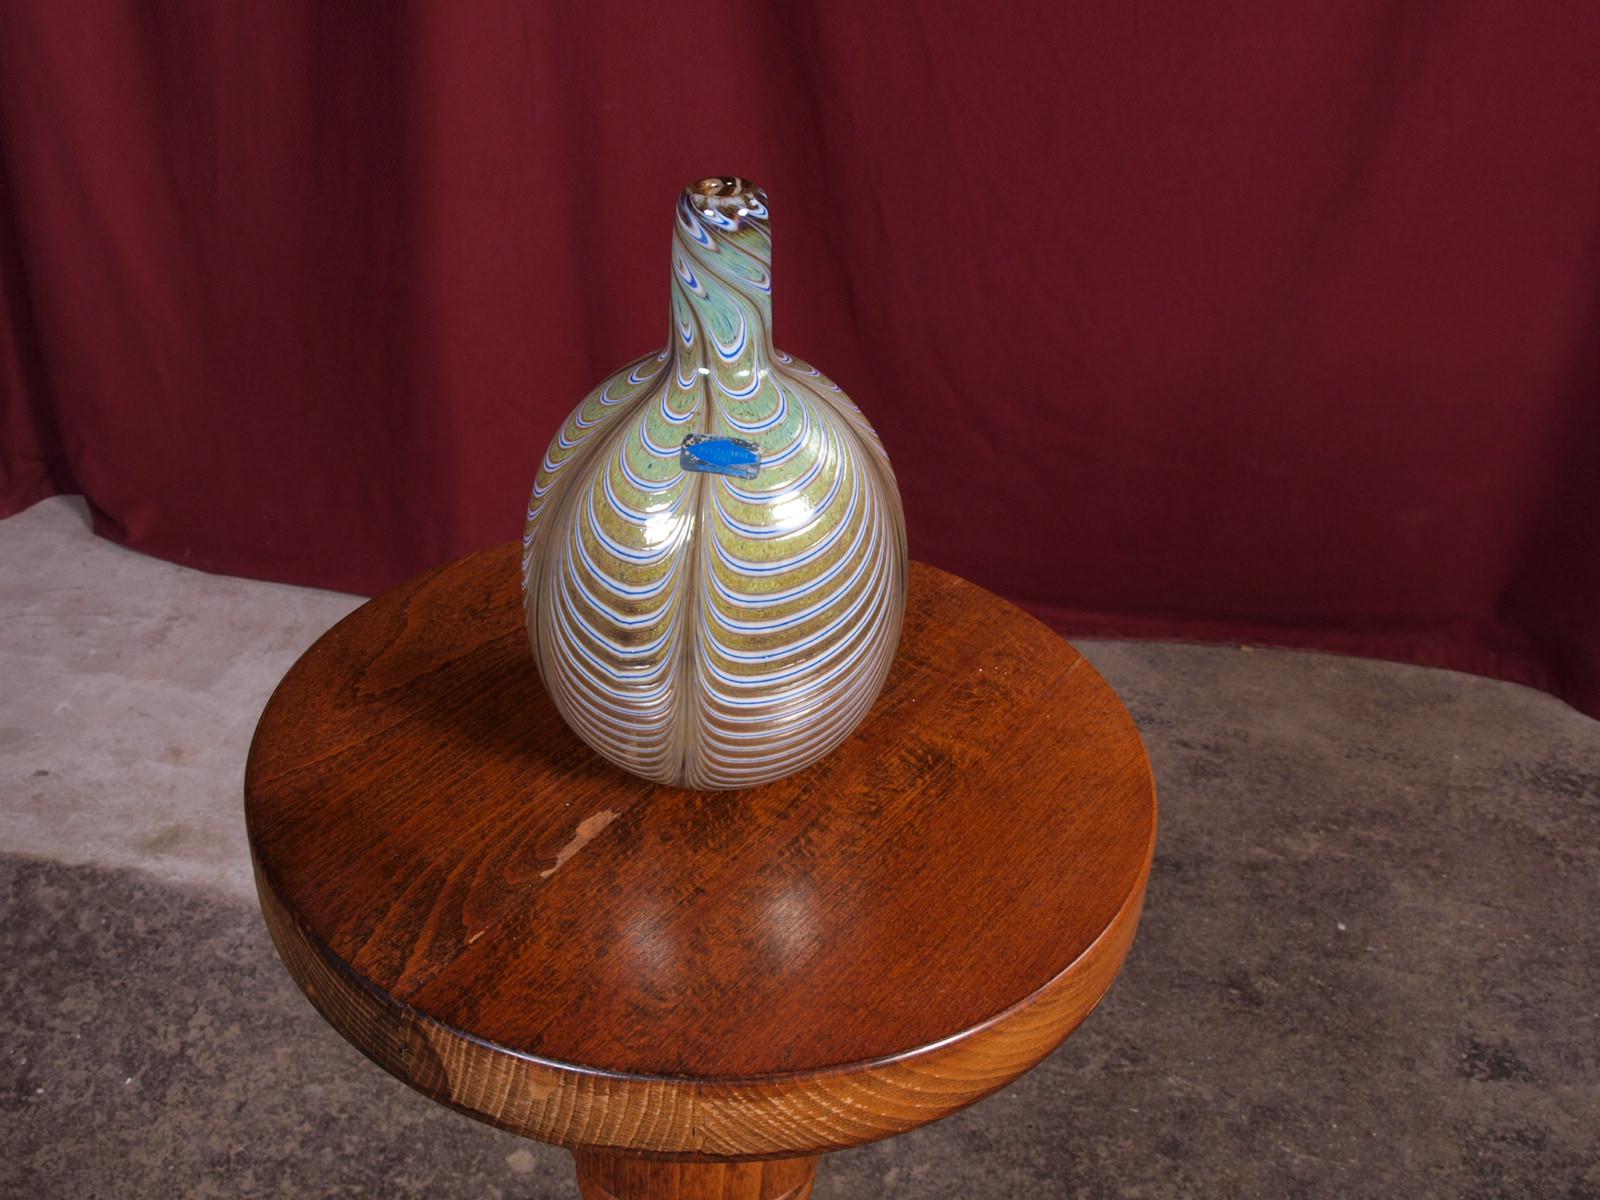 Rare Vase by Oiva Toikka (1931-2019) for Nuutajärvi Notsjö, Finland.

with the Spherical shape, narrow, almost cylindrical neck, this vase is a little jewel. It has a very delicate size and will fit in any display.


The designer is well known for